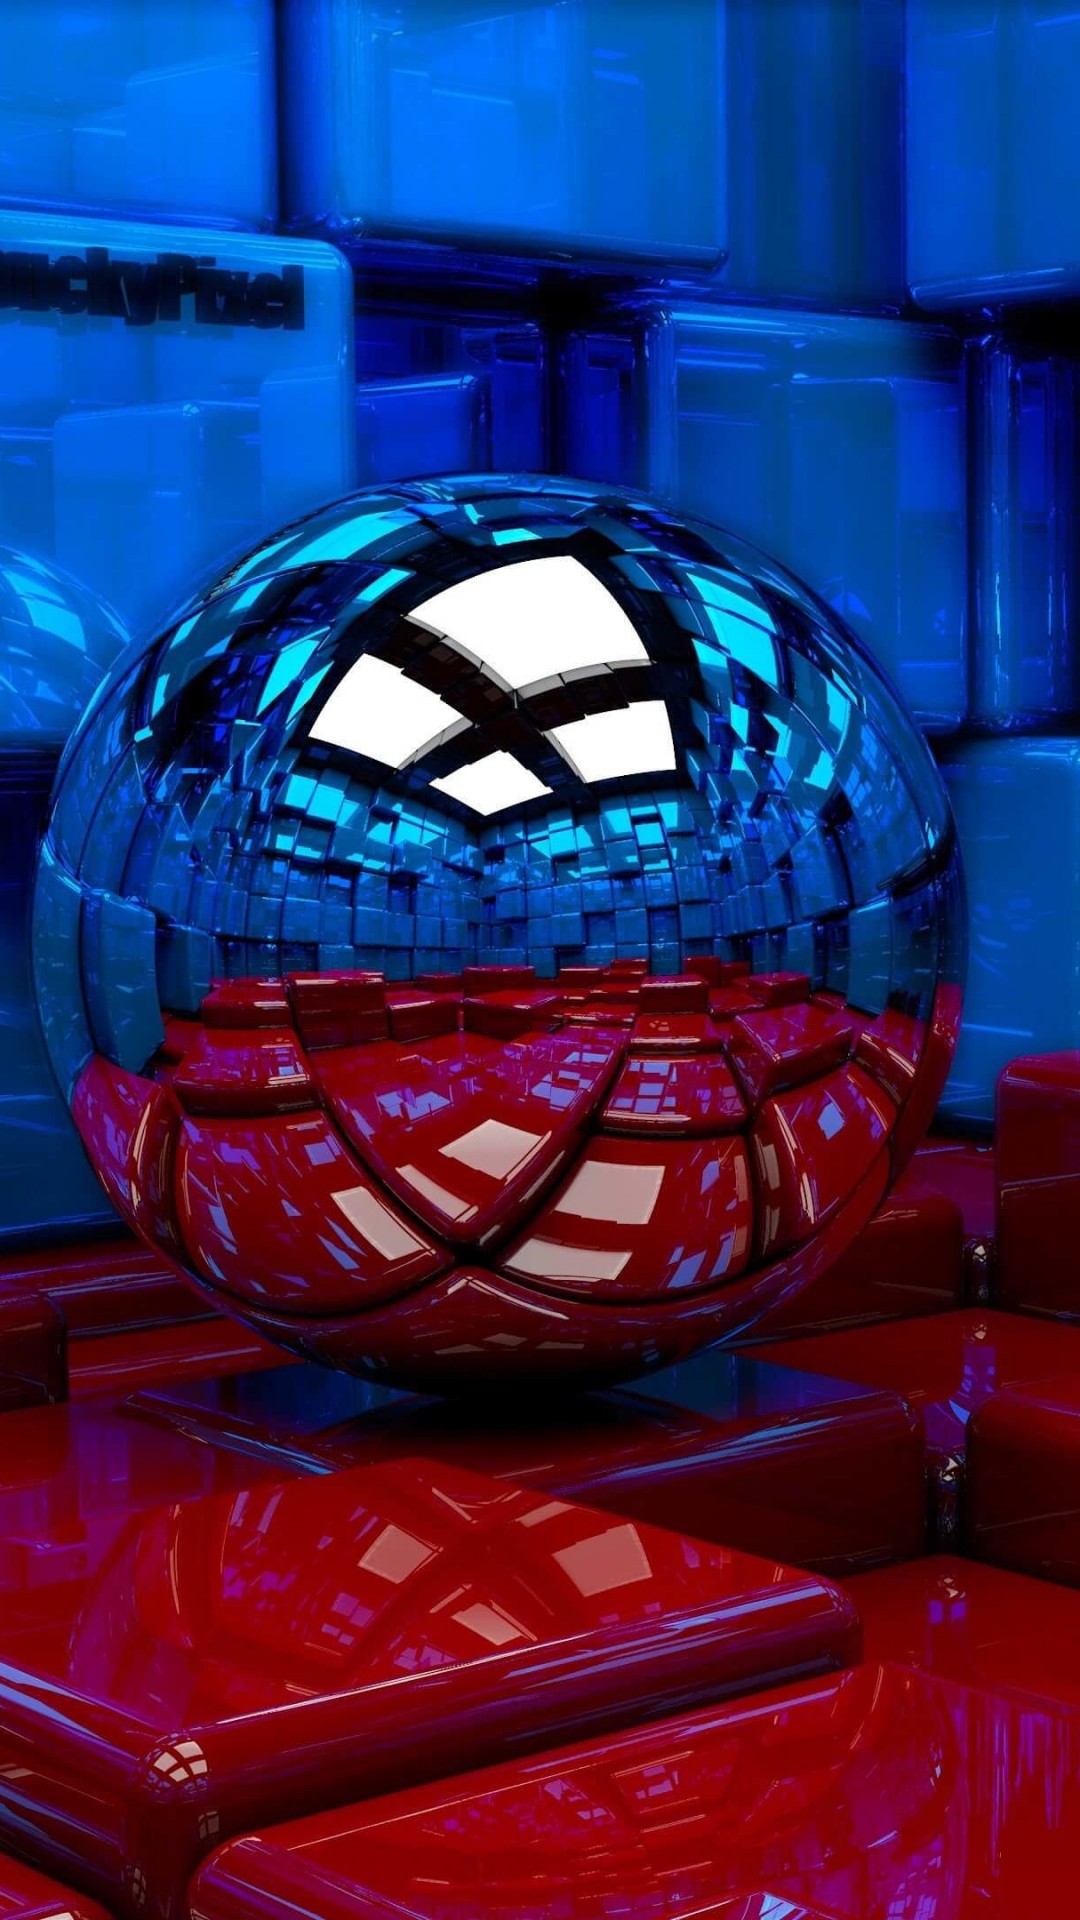 Metallic Sphere Reflecting The Cube Room Wallpaper for SONY Xperia Z3